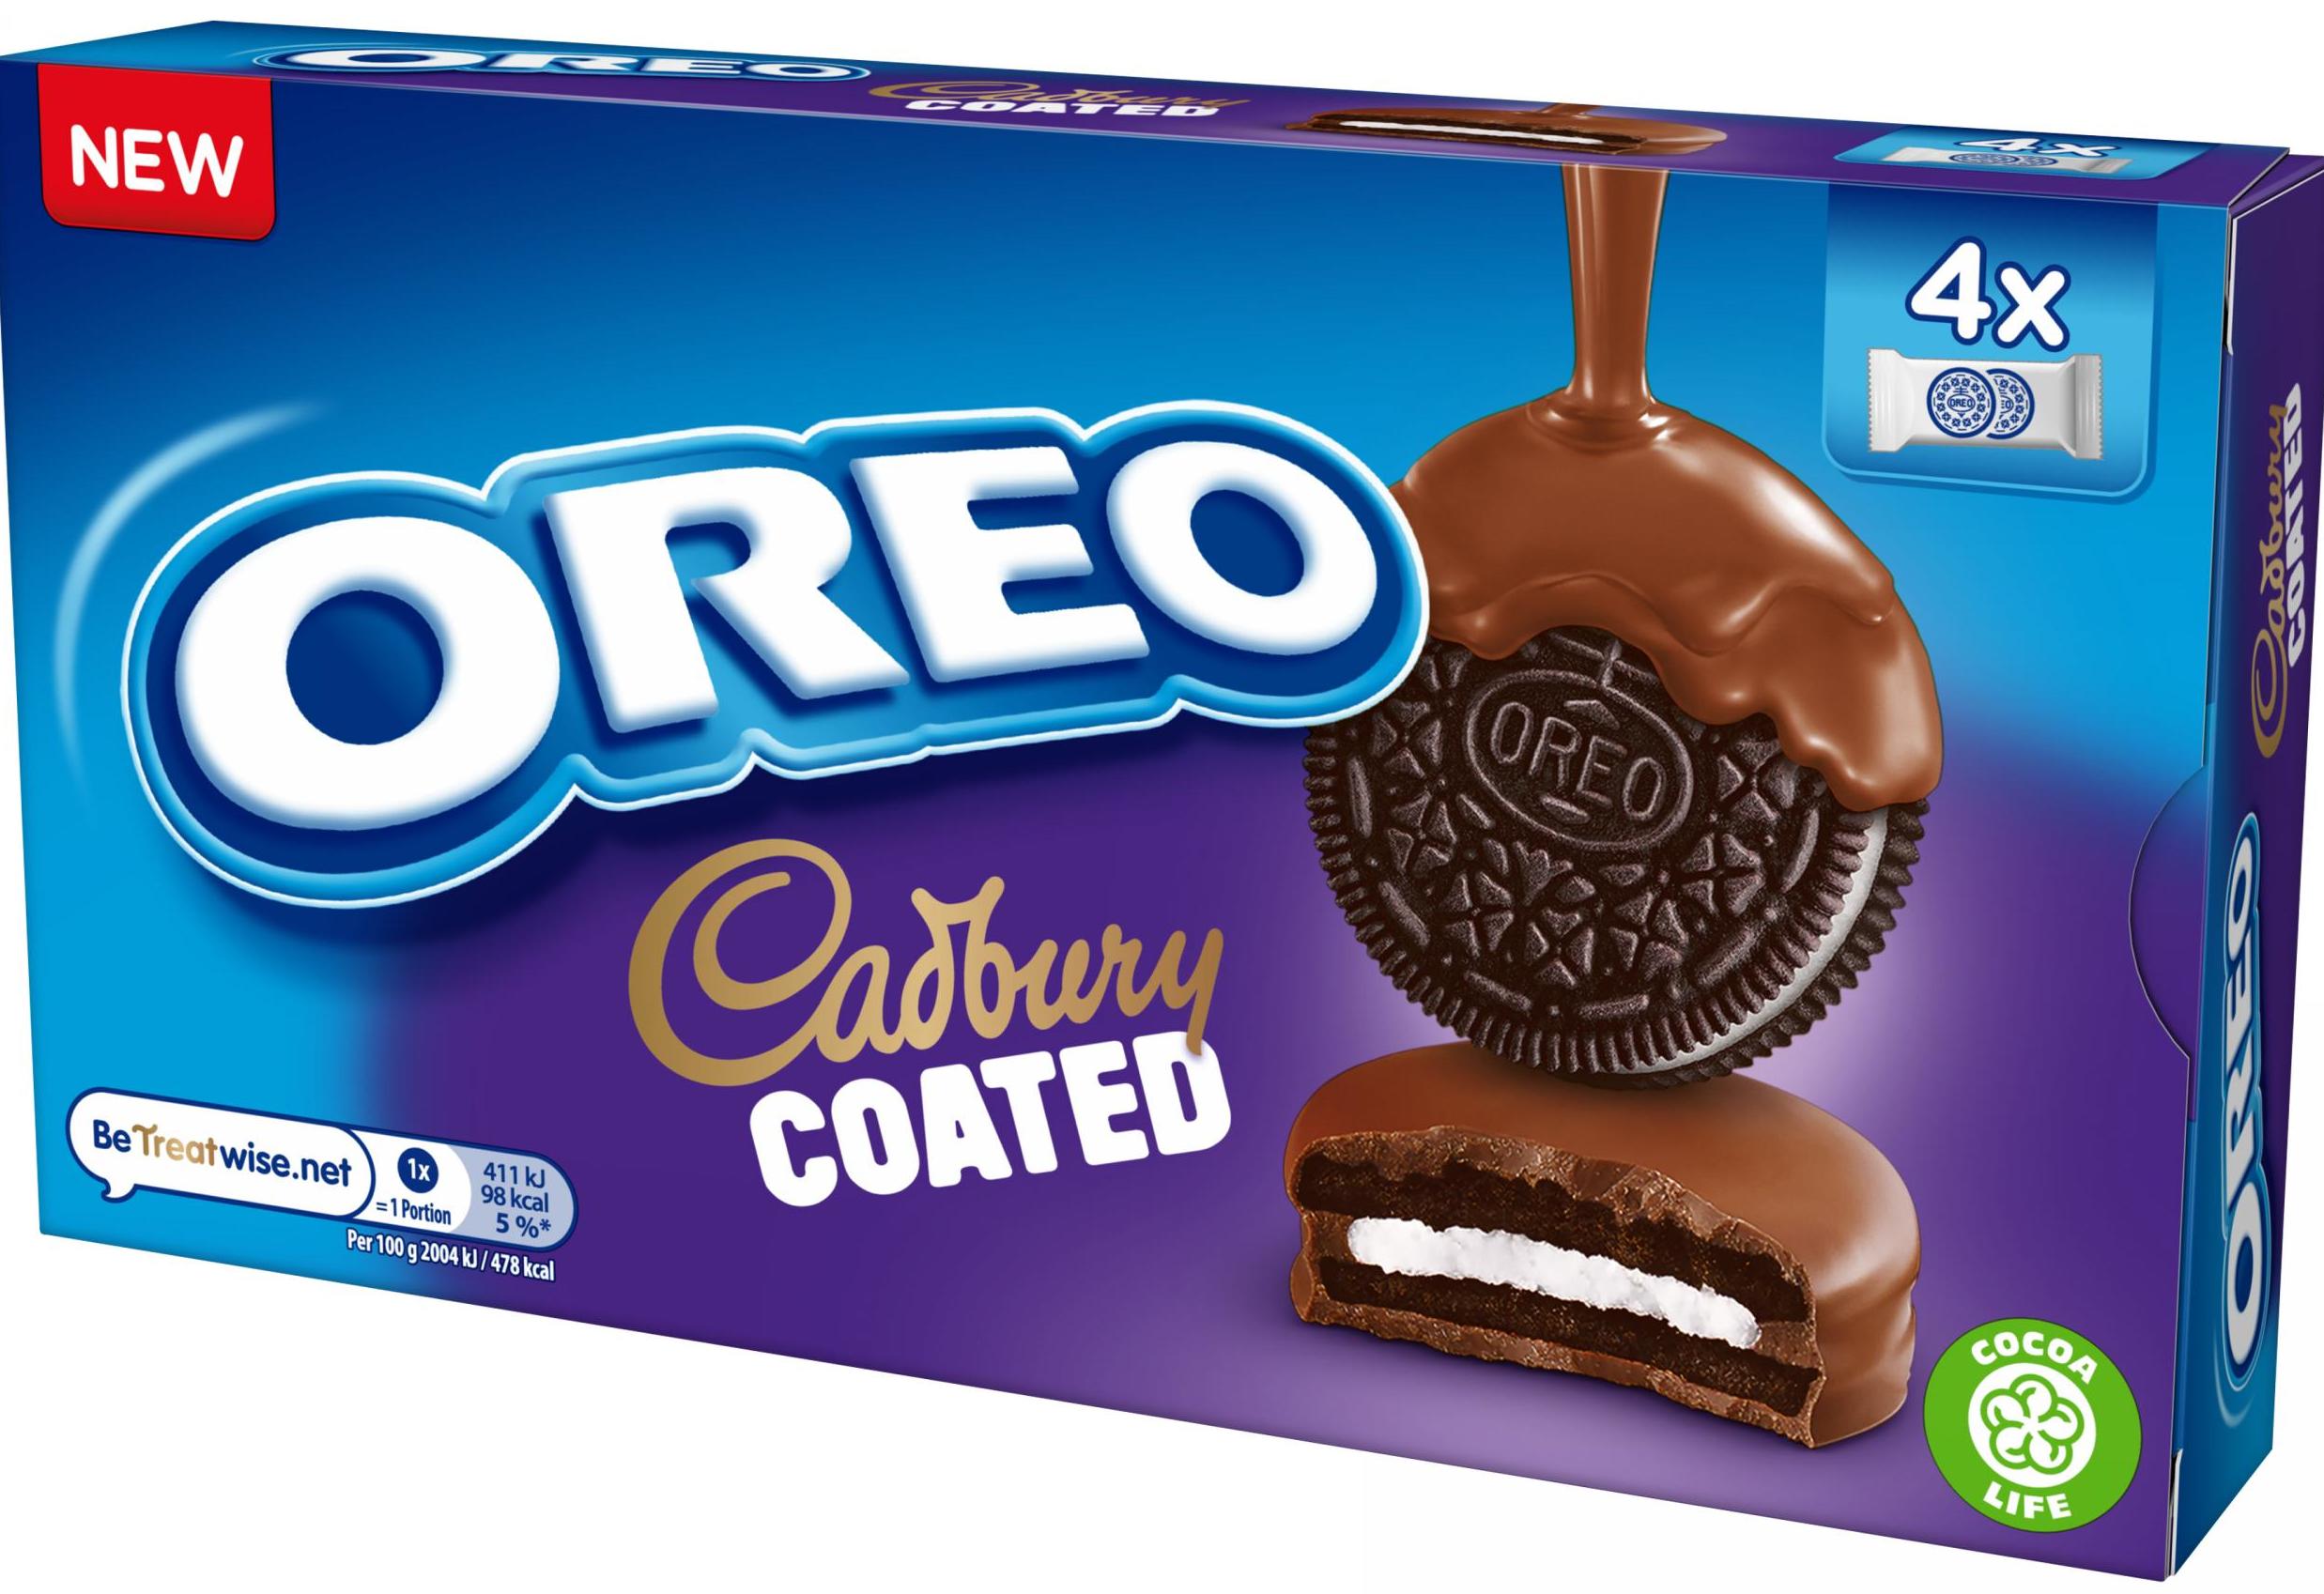 Oreo Launches Cookie Coated In Cadbury Chocolate - Bank2home.com